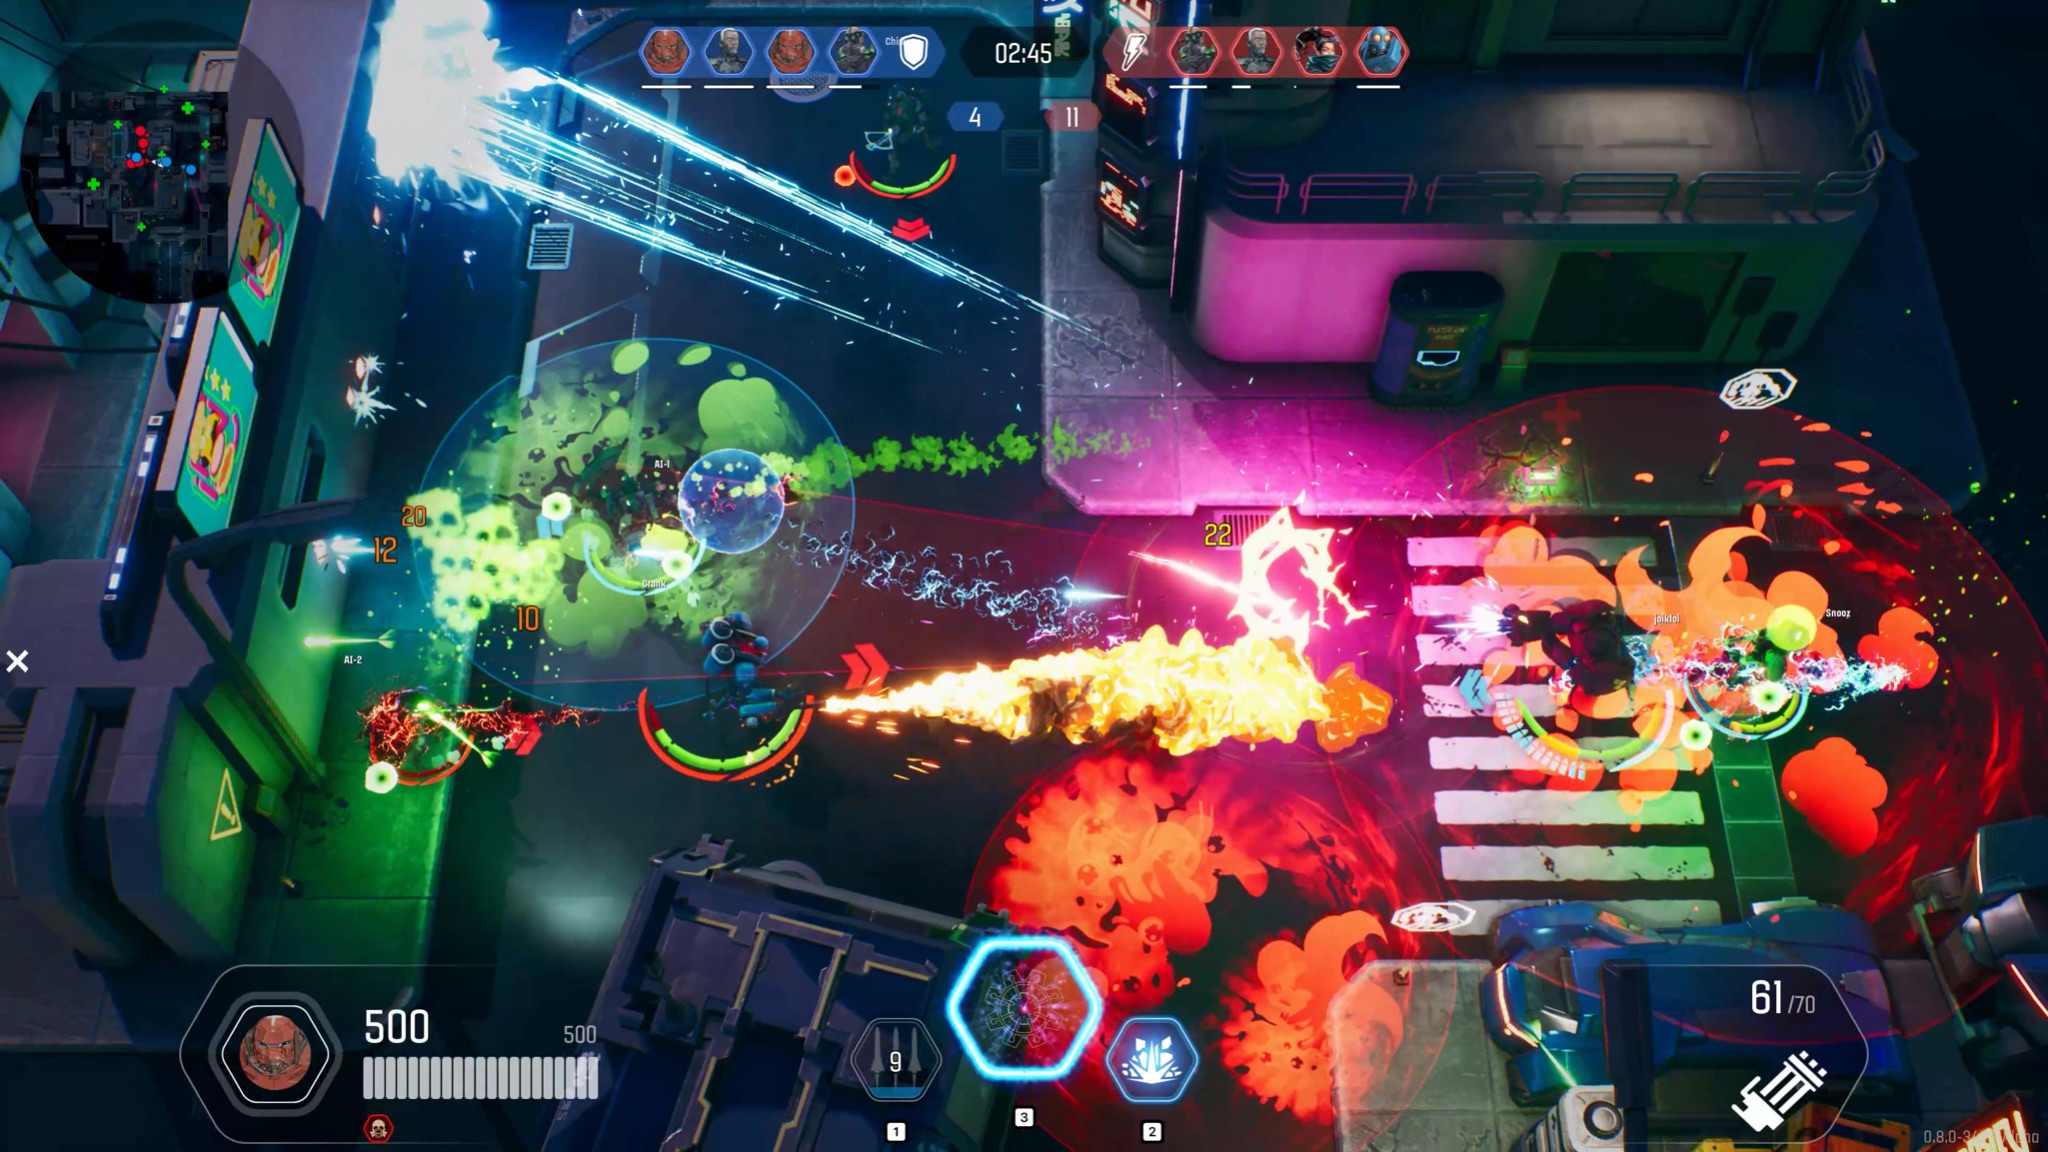 The Machines Arena next level in competitive hero shooters blasts into Steam Closed Beta Soon!